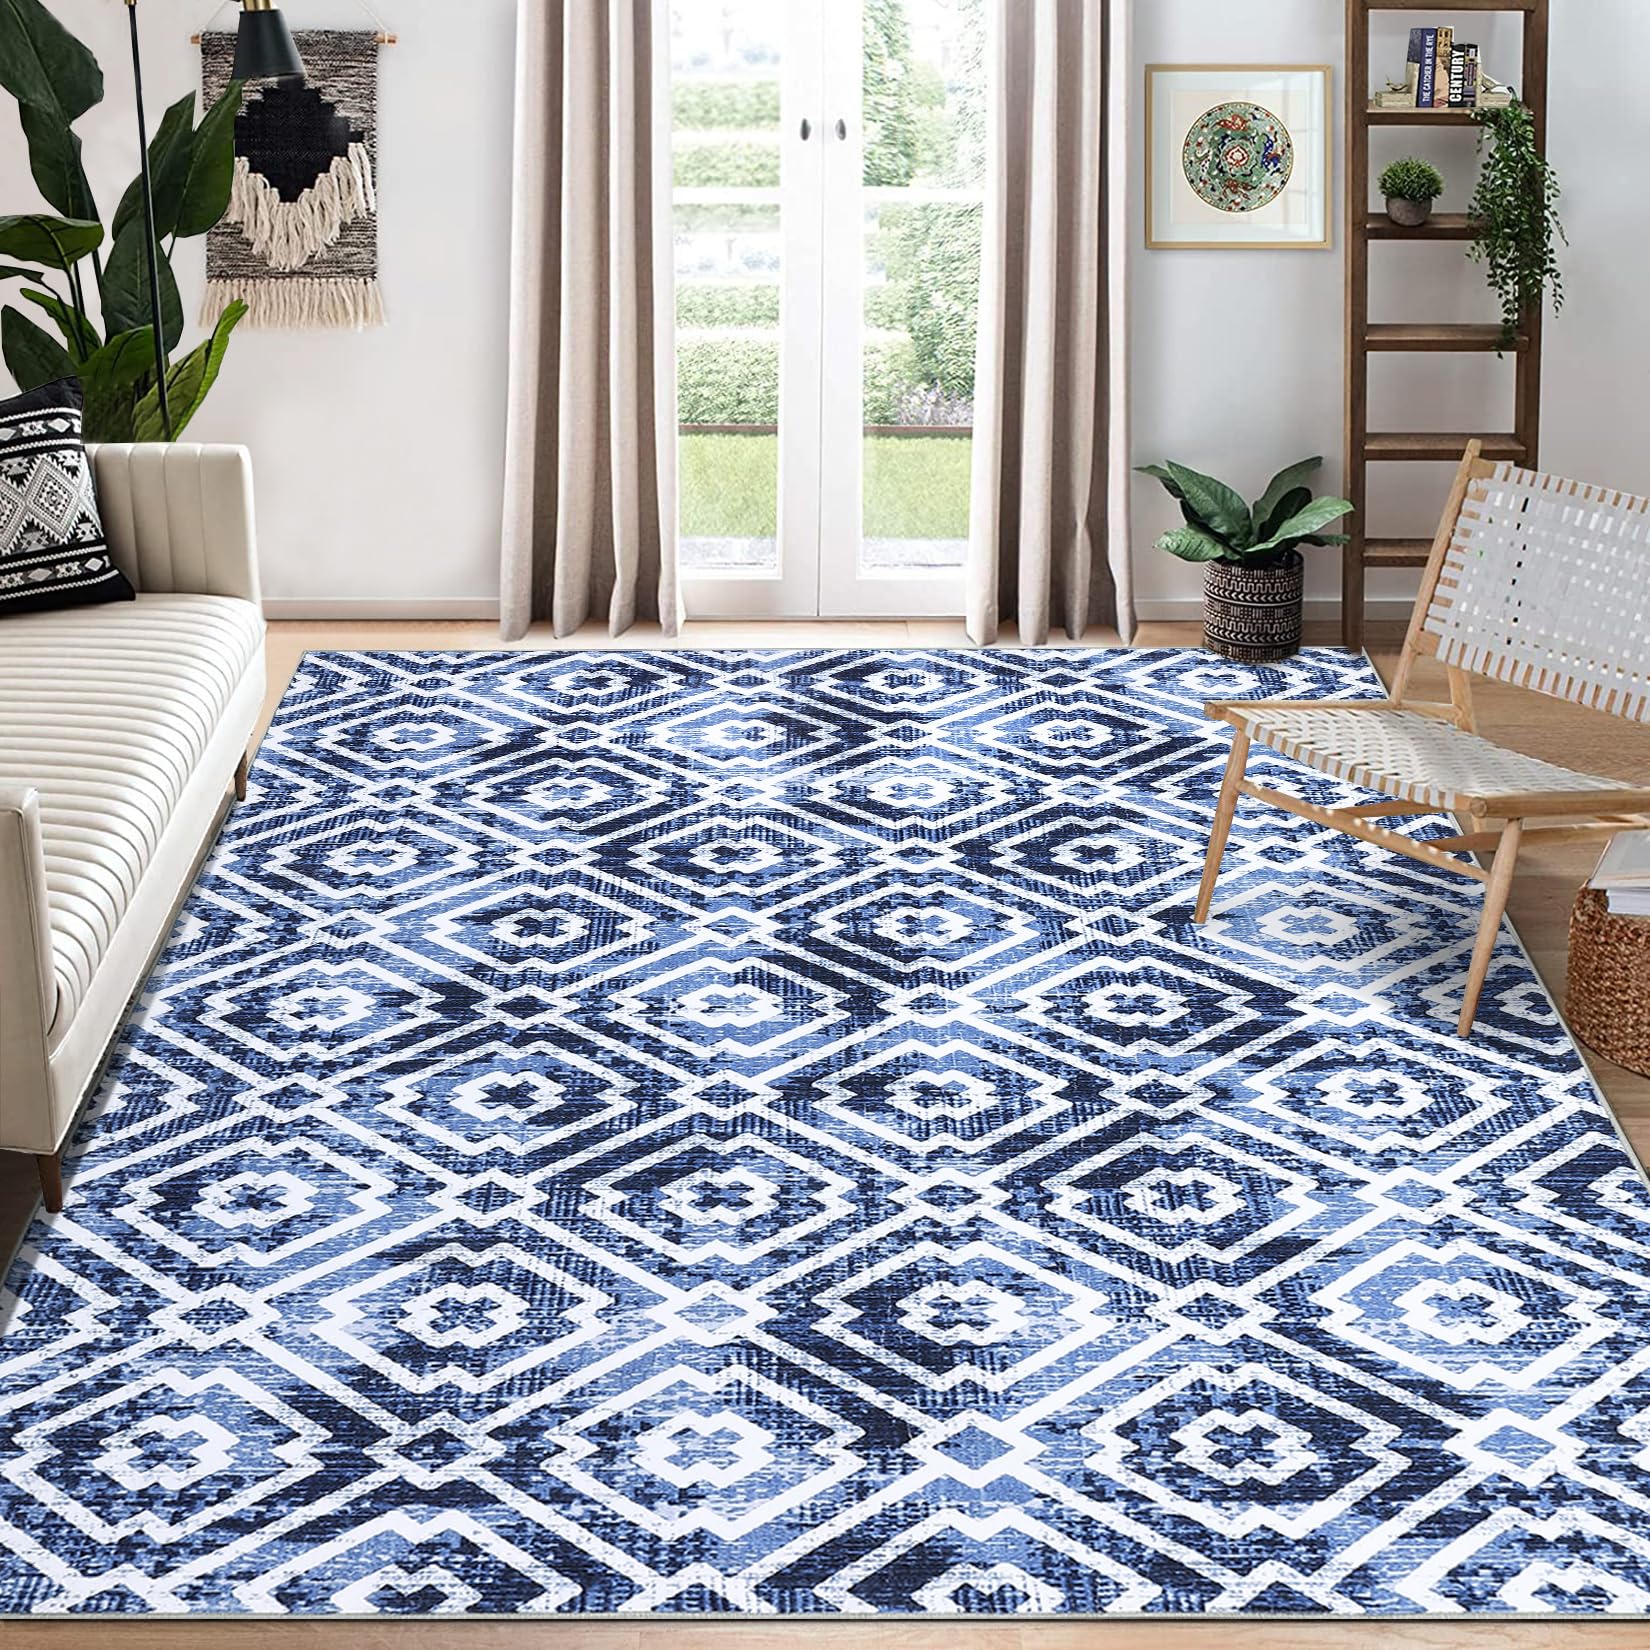 8x10 Area Rug Moroccan Machine Washable Rug Modern Geometric Trellis Area Rug Distressed Stain Resistant Non-Slip Floor Cover Carpet Rug Foldable Accent Rug for Home Decor